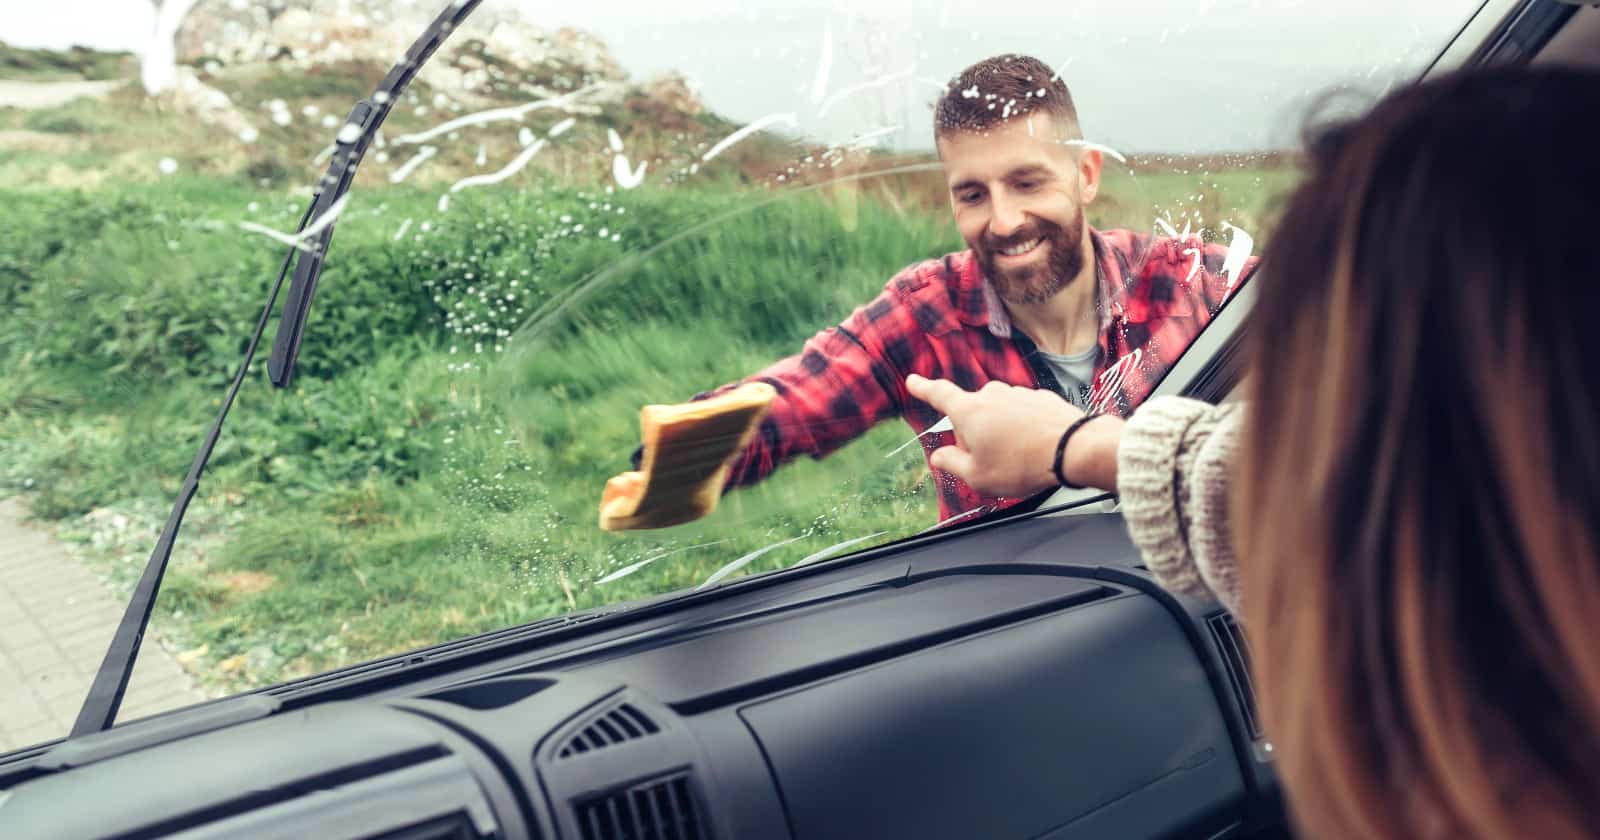 Man smiling spring cleaning van windshield with cloth while woman pointing stain